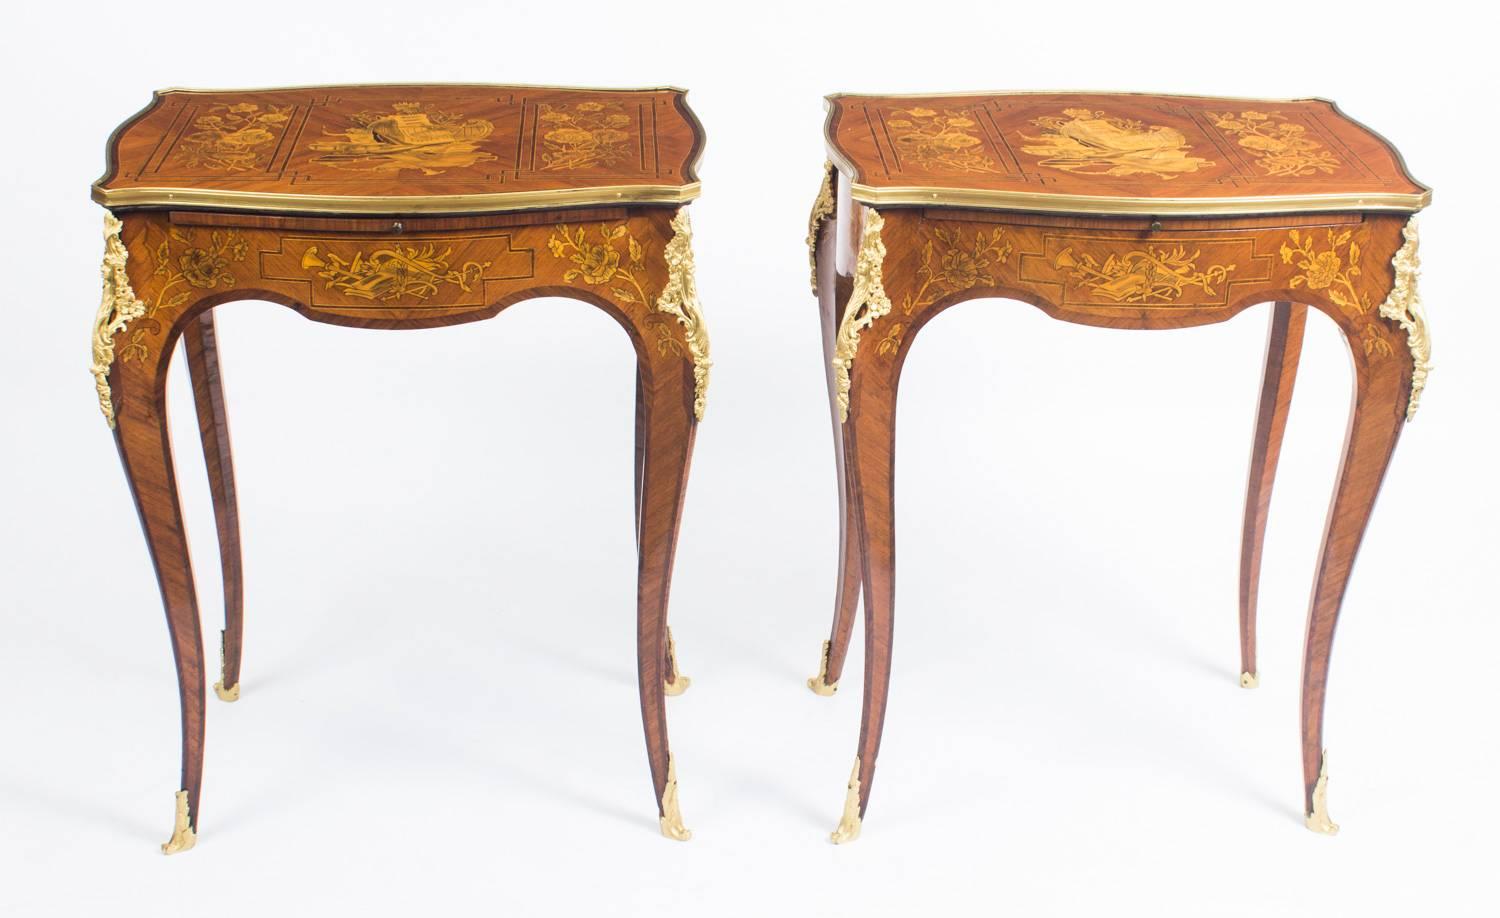 This is a stunning pair of antique French oval marquetry and ormolu mounted occasional tables, circa 1900 in date.

The elegant tables feature shaped rectangular tops inlaid with rectangular panels of putti and musical instruments flanked by panels